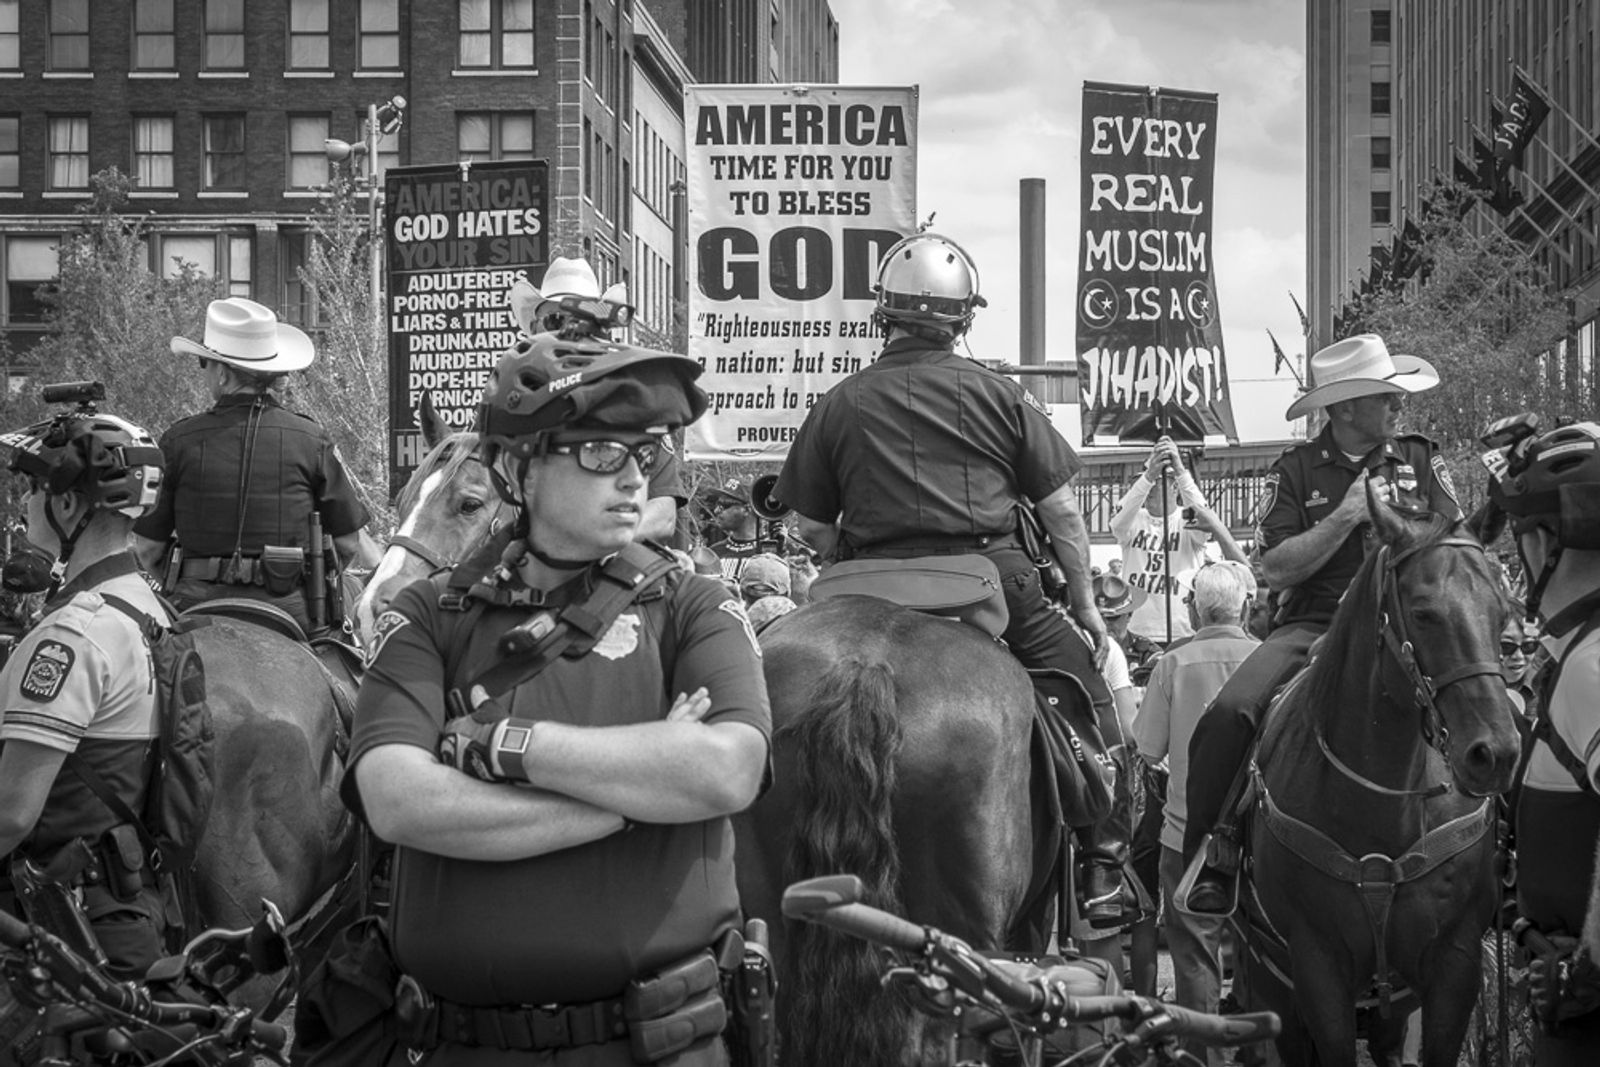 © Chuck Mintz - Image from the RNC 2016 photography project